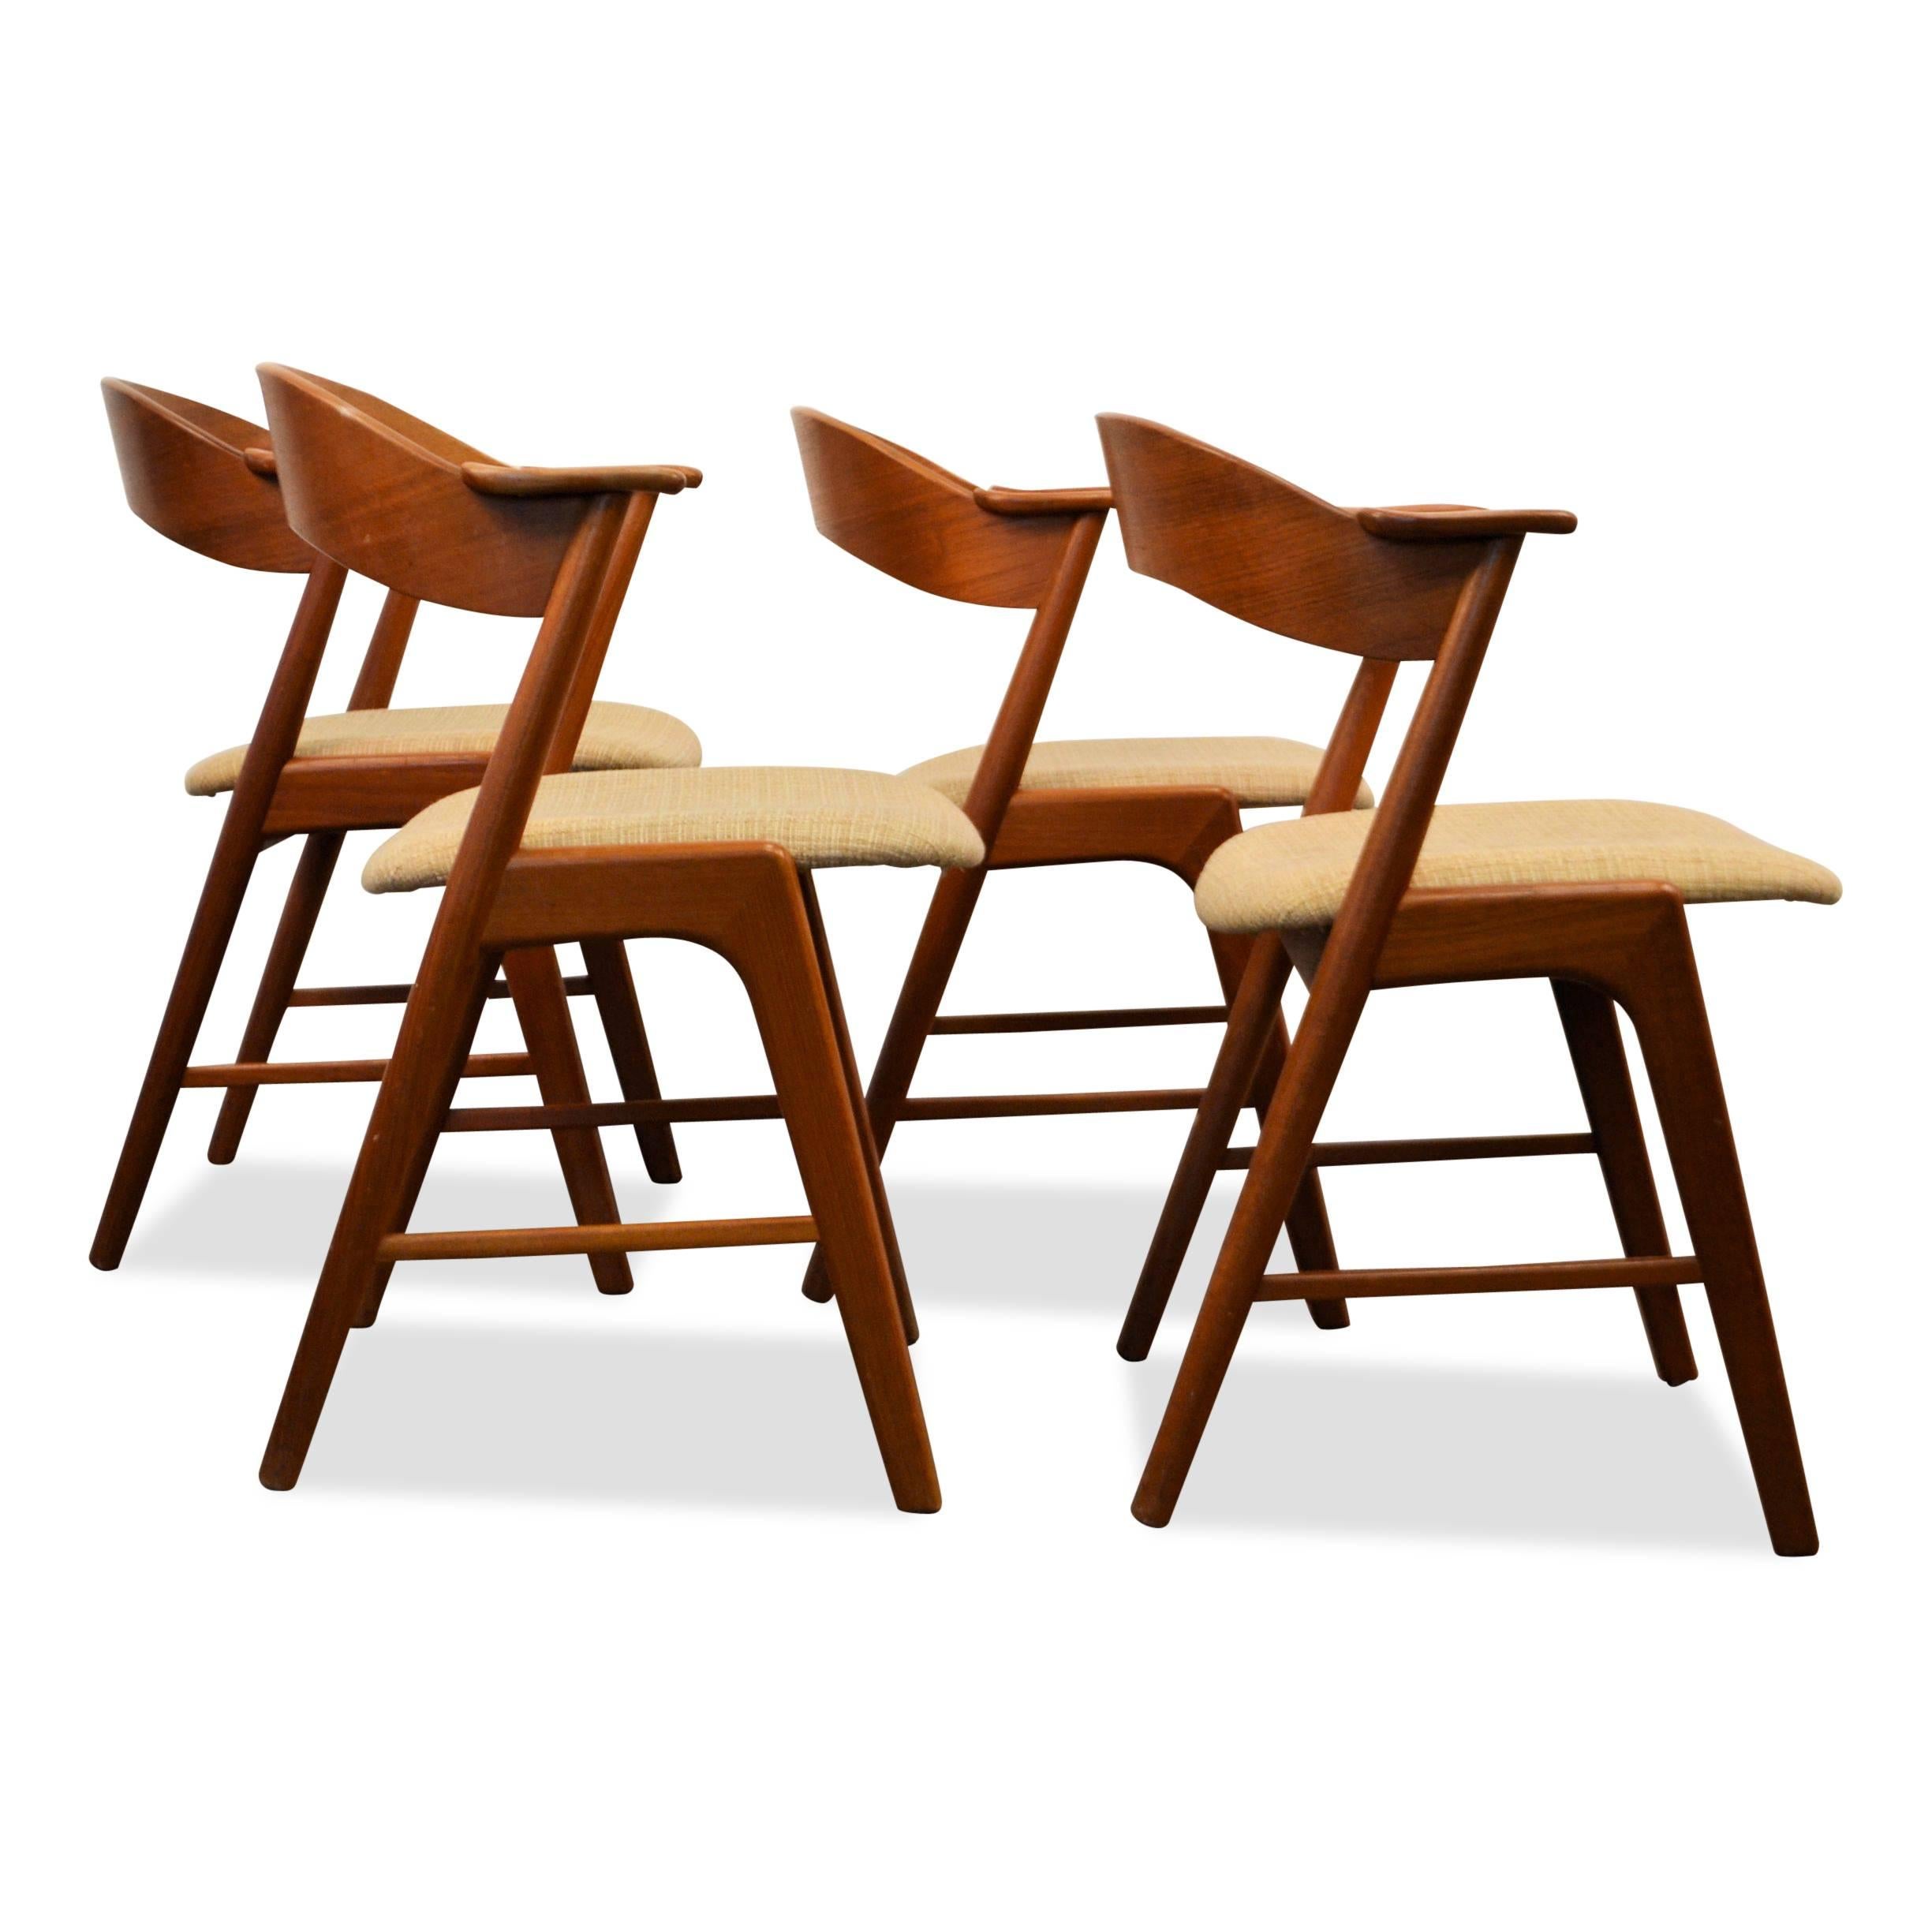 Gorgeous set of Danish modern teak dining chairs designed by Kai Kristiansen for Danish manufacturer K.S. Møbler. Kristiansen became worldwide known and celebrated for his iconic dining chair designs. These confortable chairs are no exception, the